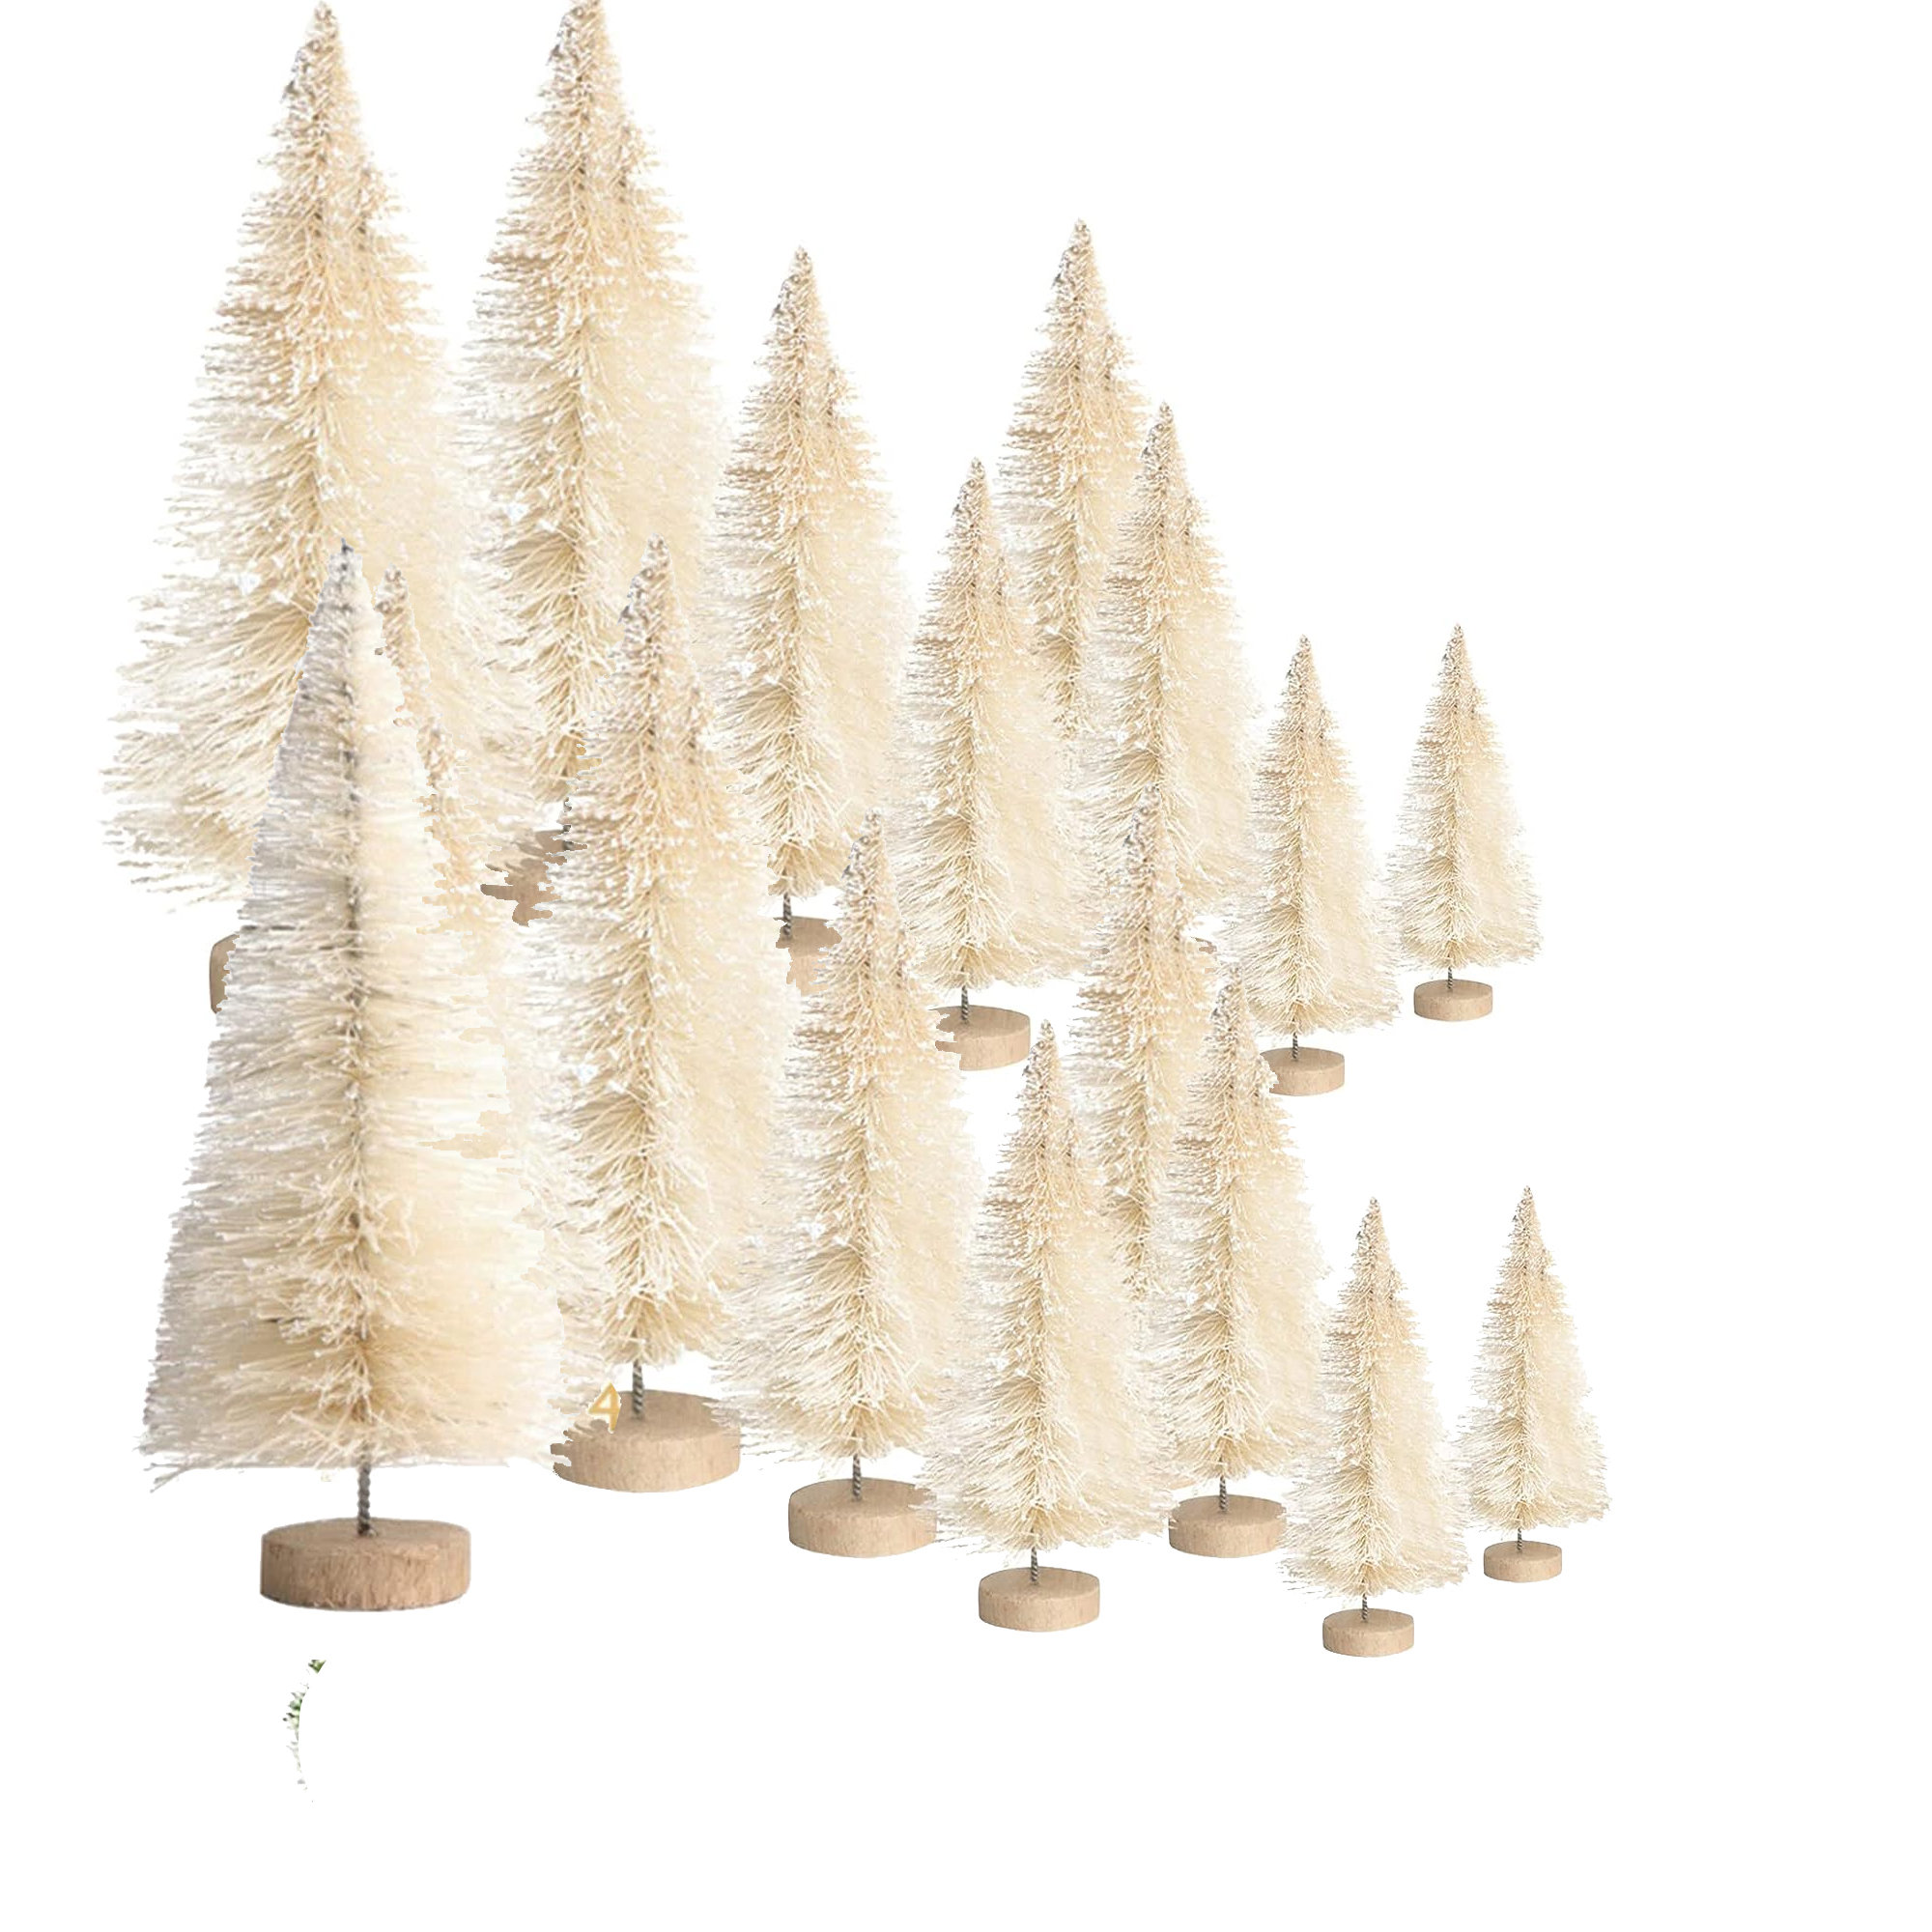 miniature christmas trees with lights